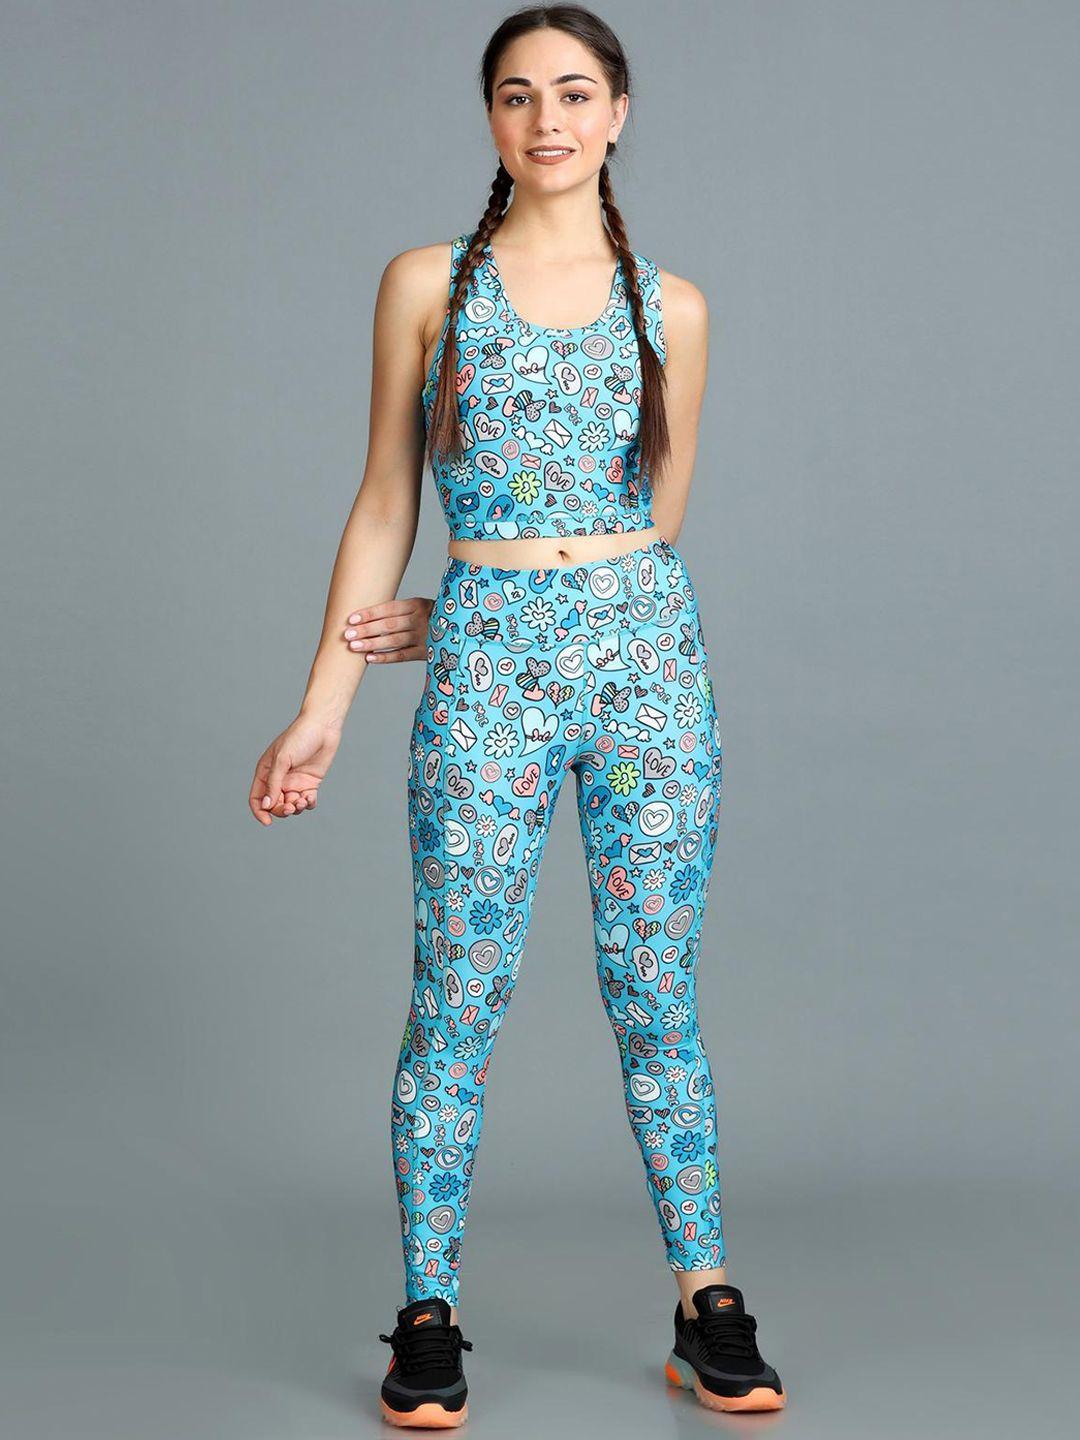 the dance bible printed activewear padded top & leggings co-ords set